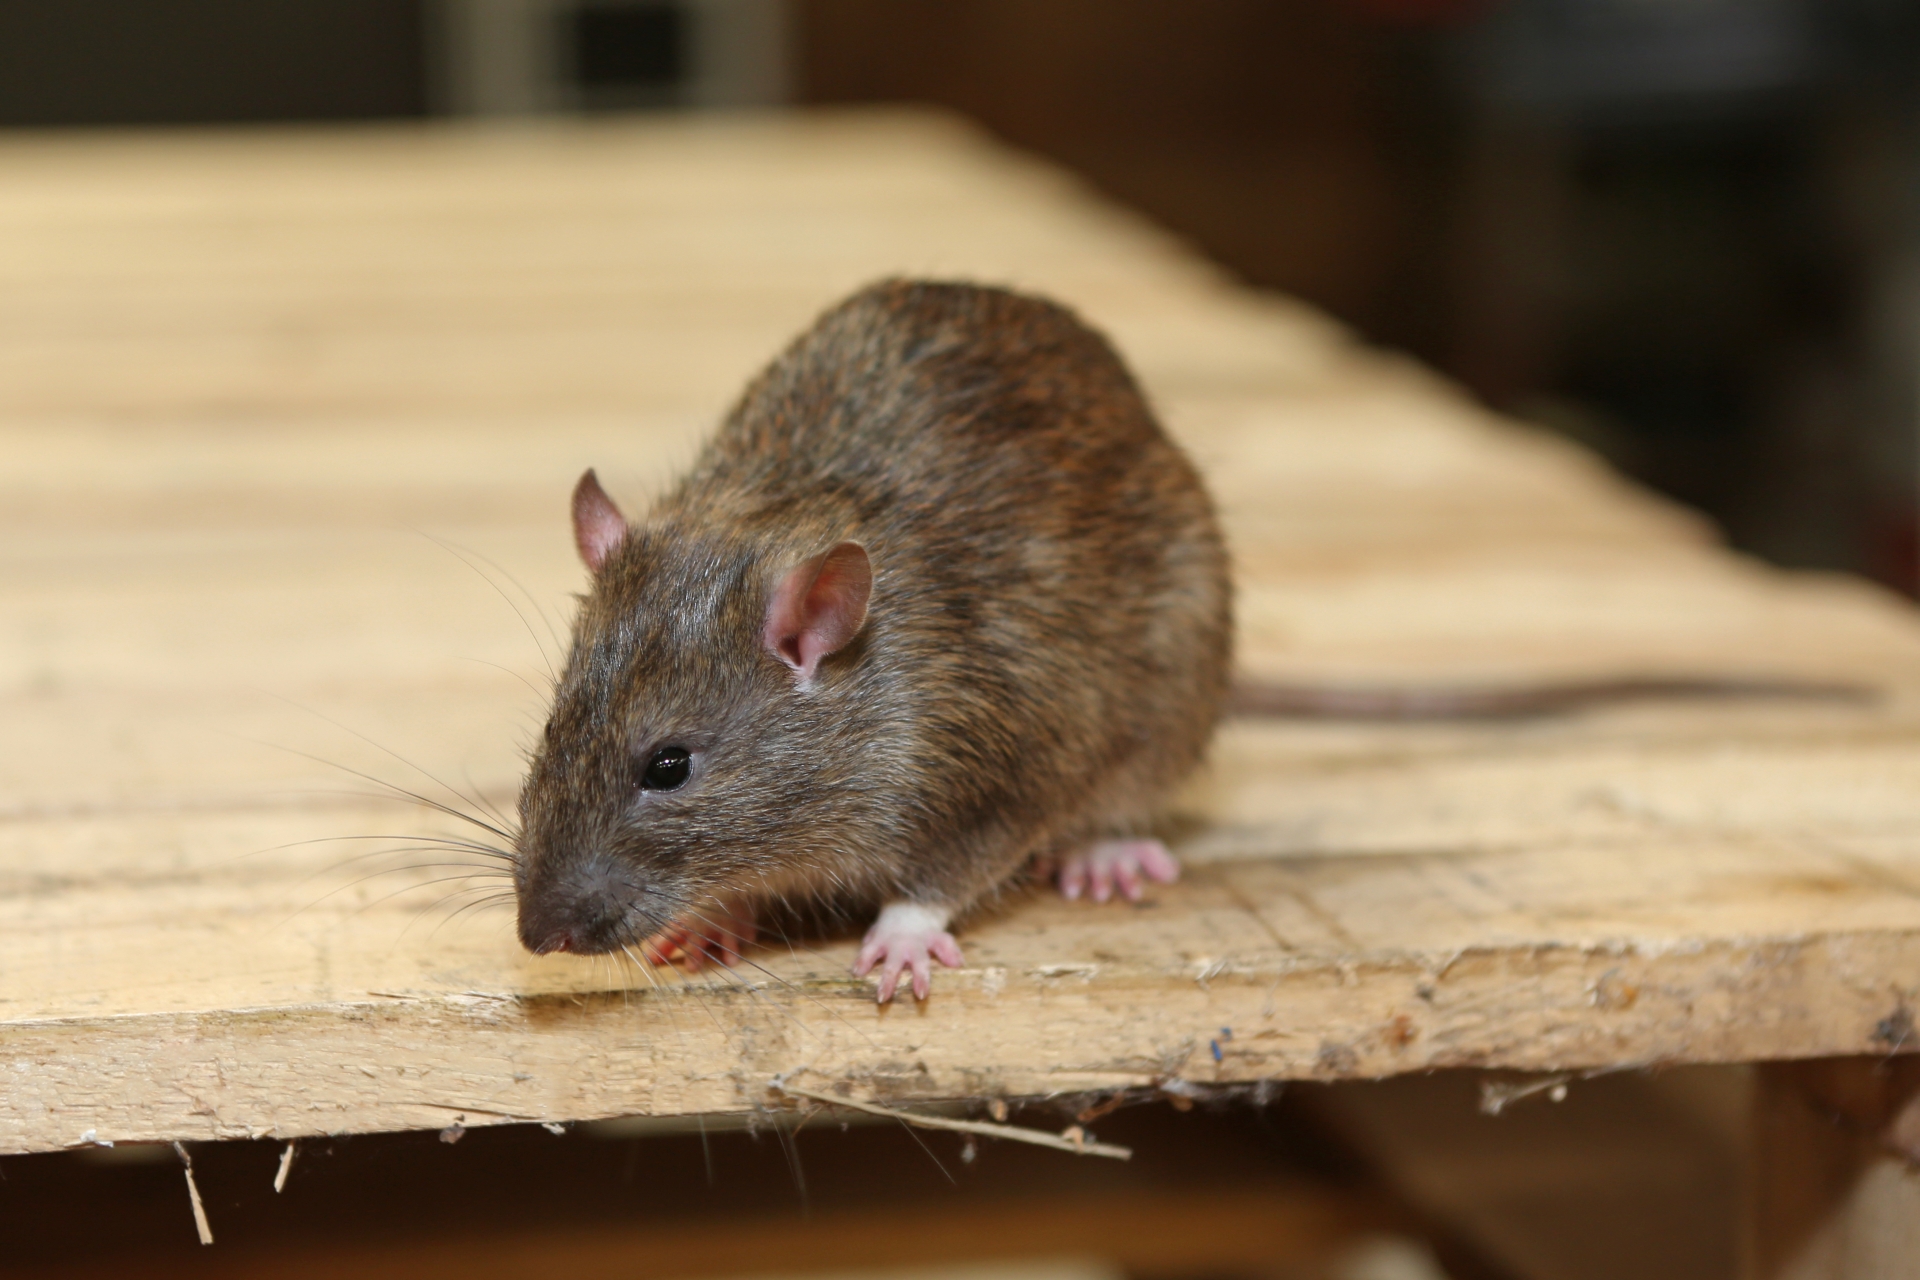 Rat Control, Pest Control in Molesey, East Molesey, West Molesey, KT8. Call Now 020 8166 9746